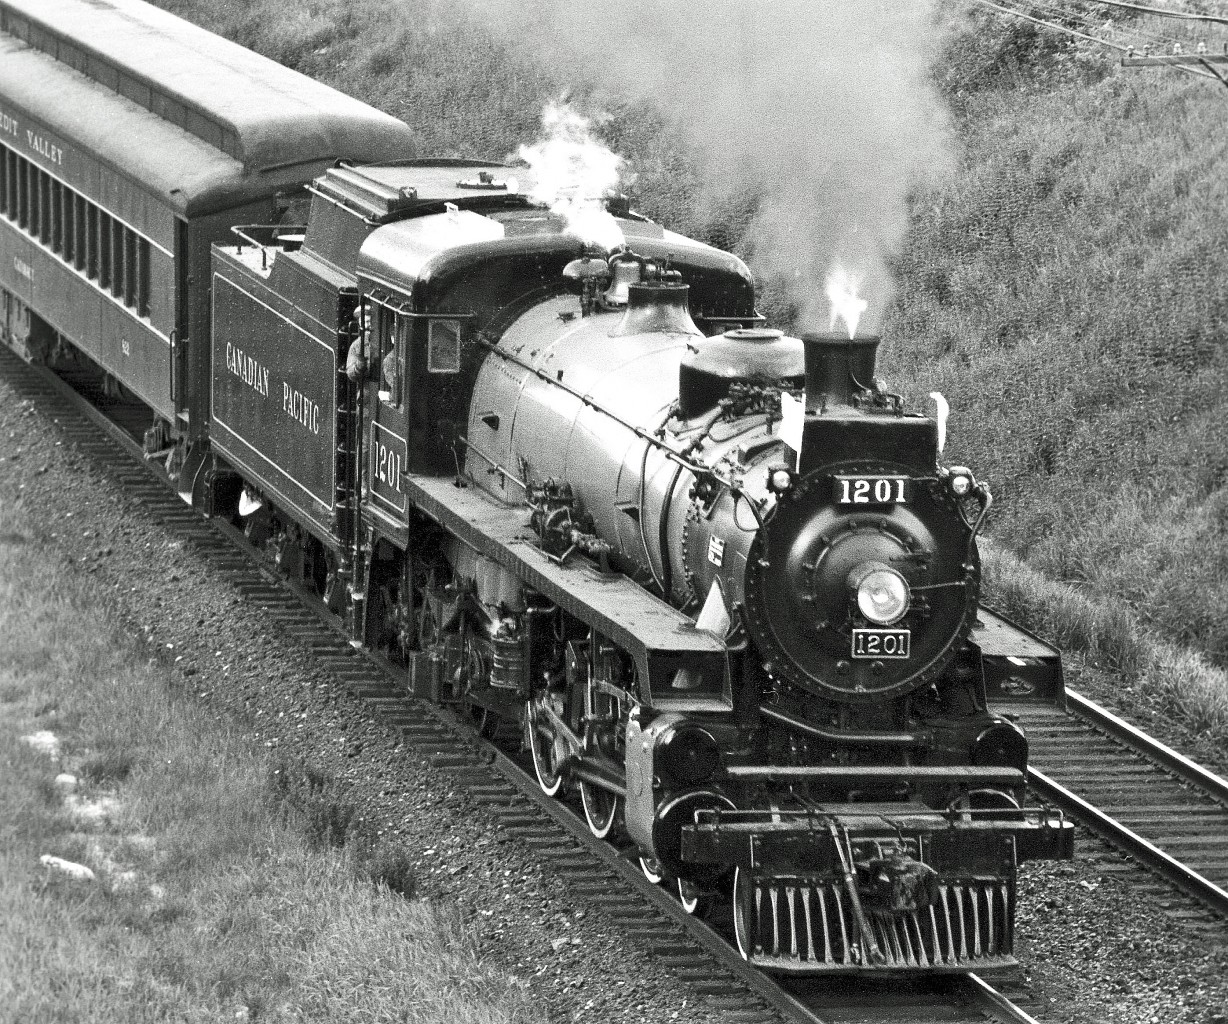 After being restored, Pacific-type #1201 made several test runs.  Emerging from the doorway is my friend, Canadian actor Mr. Guy Sanvido.  Circa May 1976.